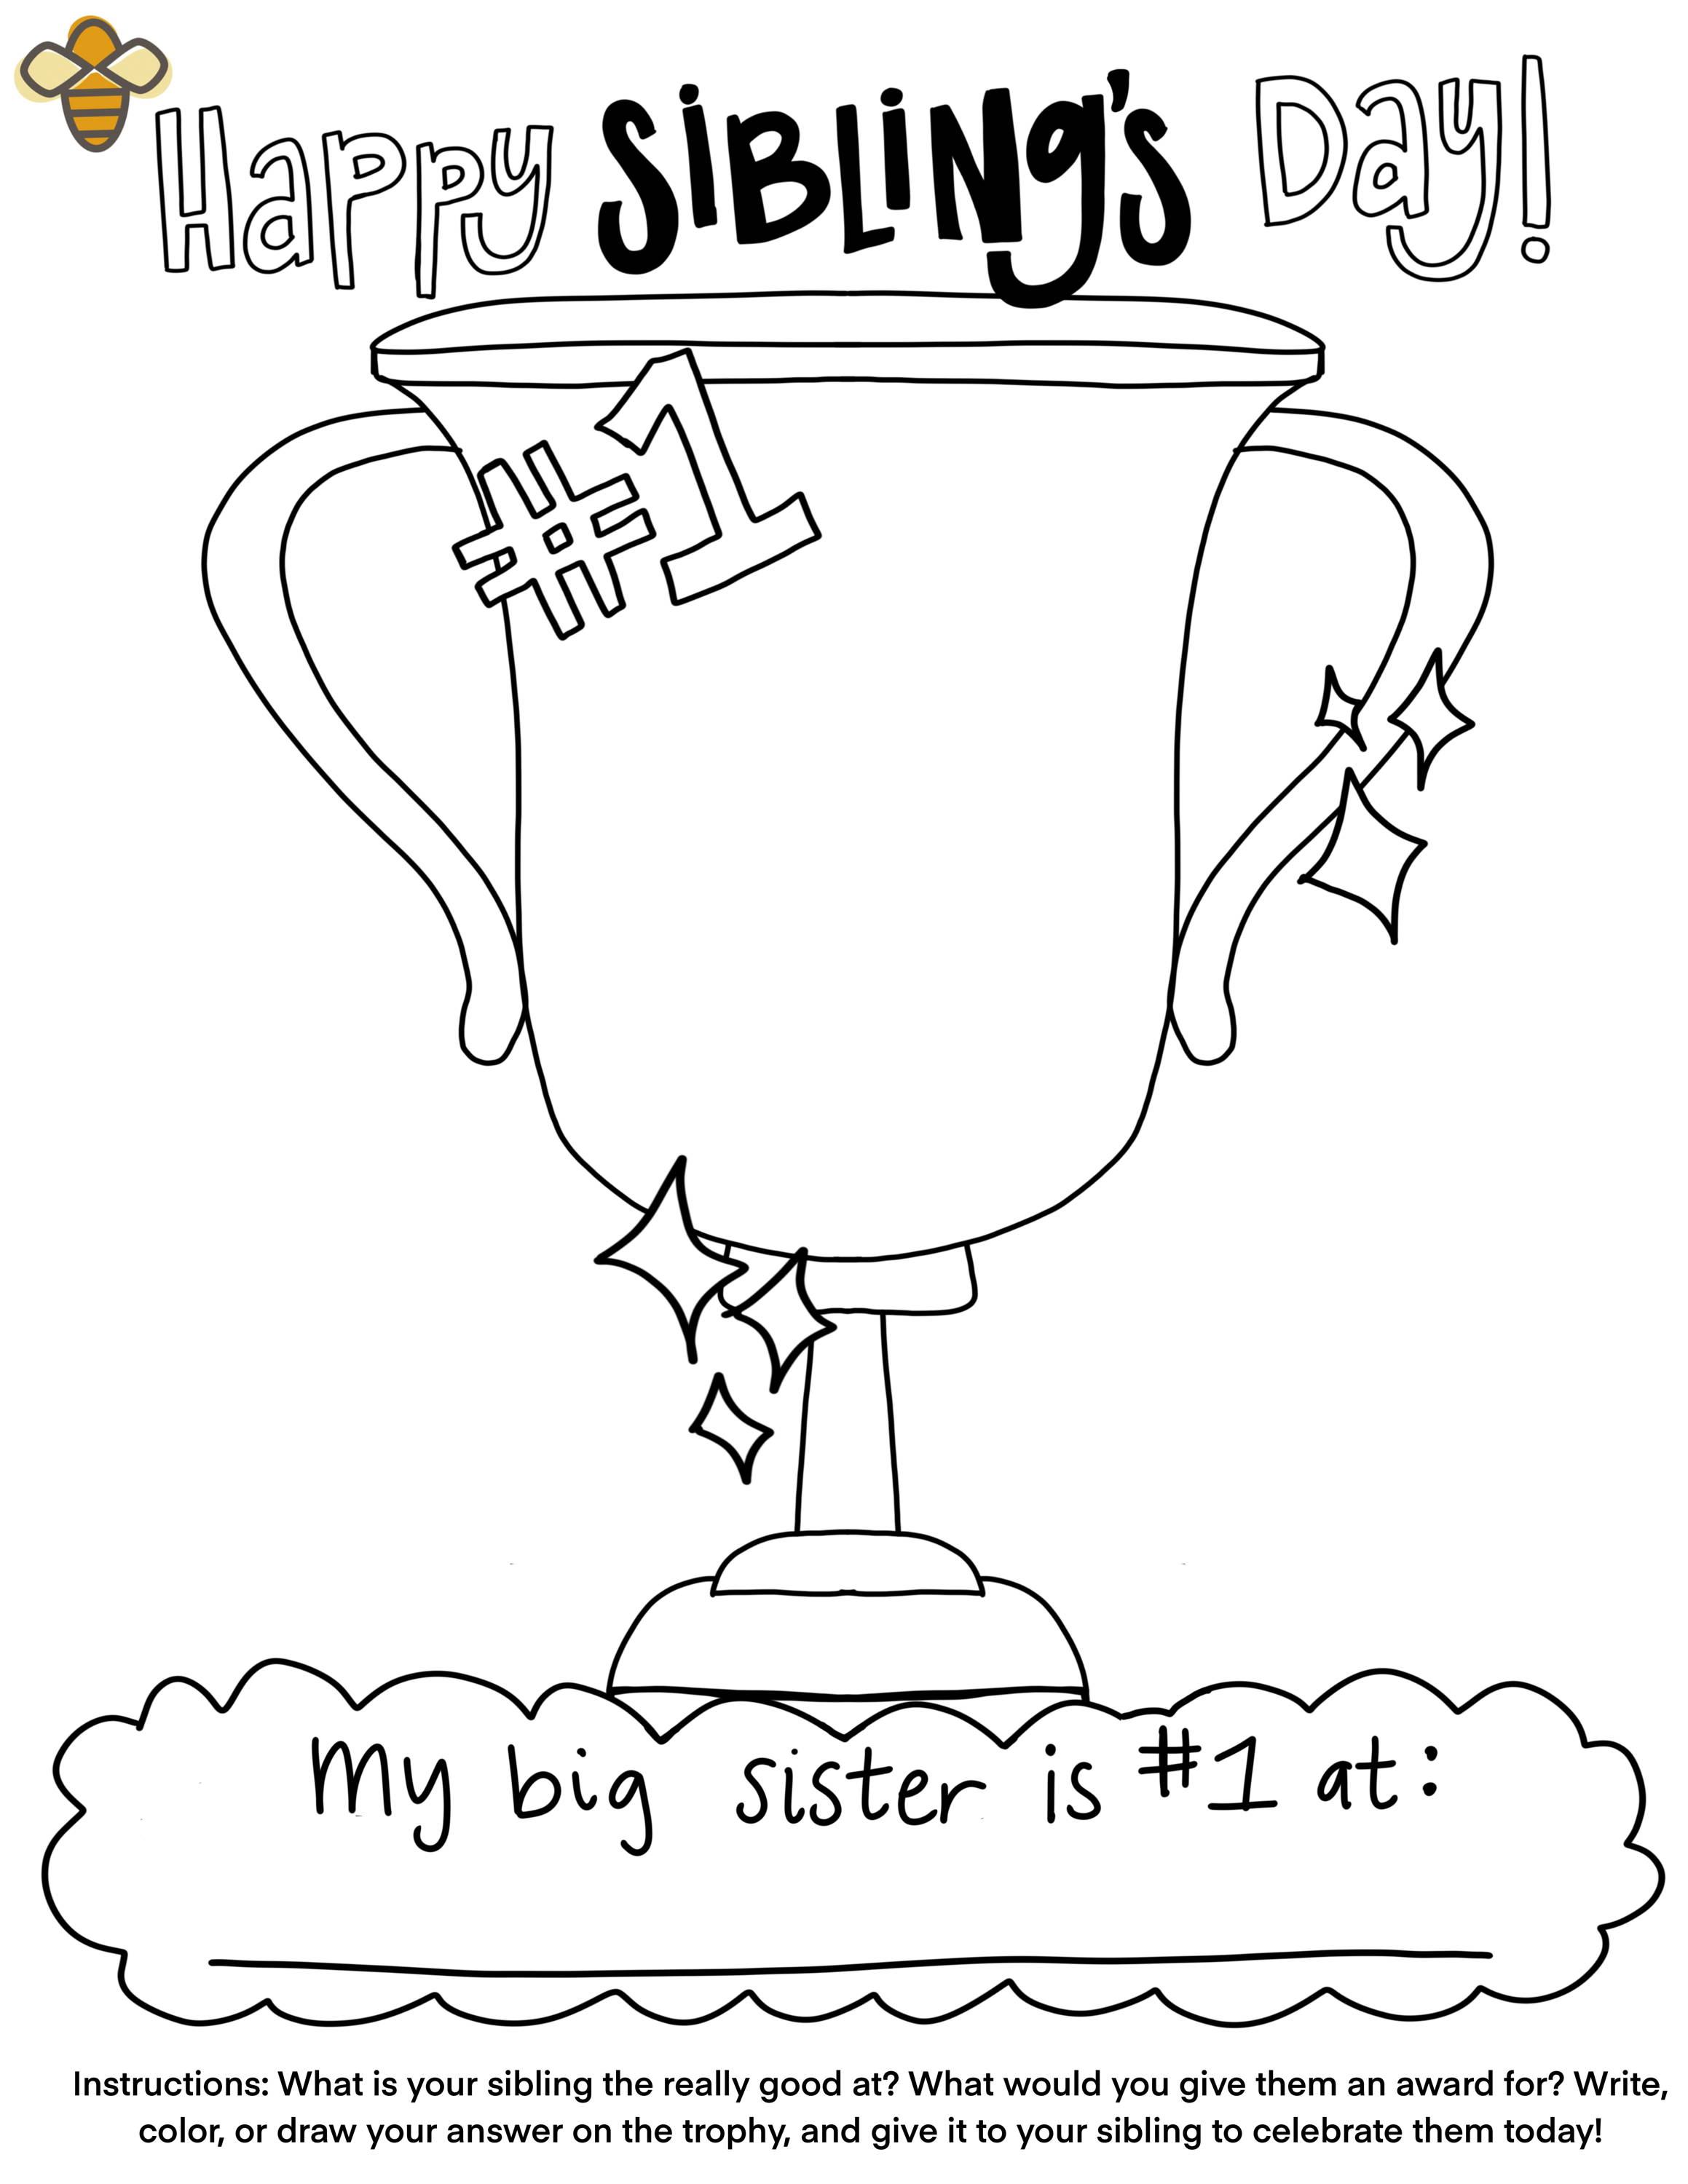 Coloring Pages | HoneyBug